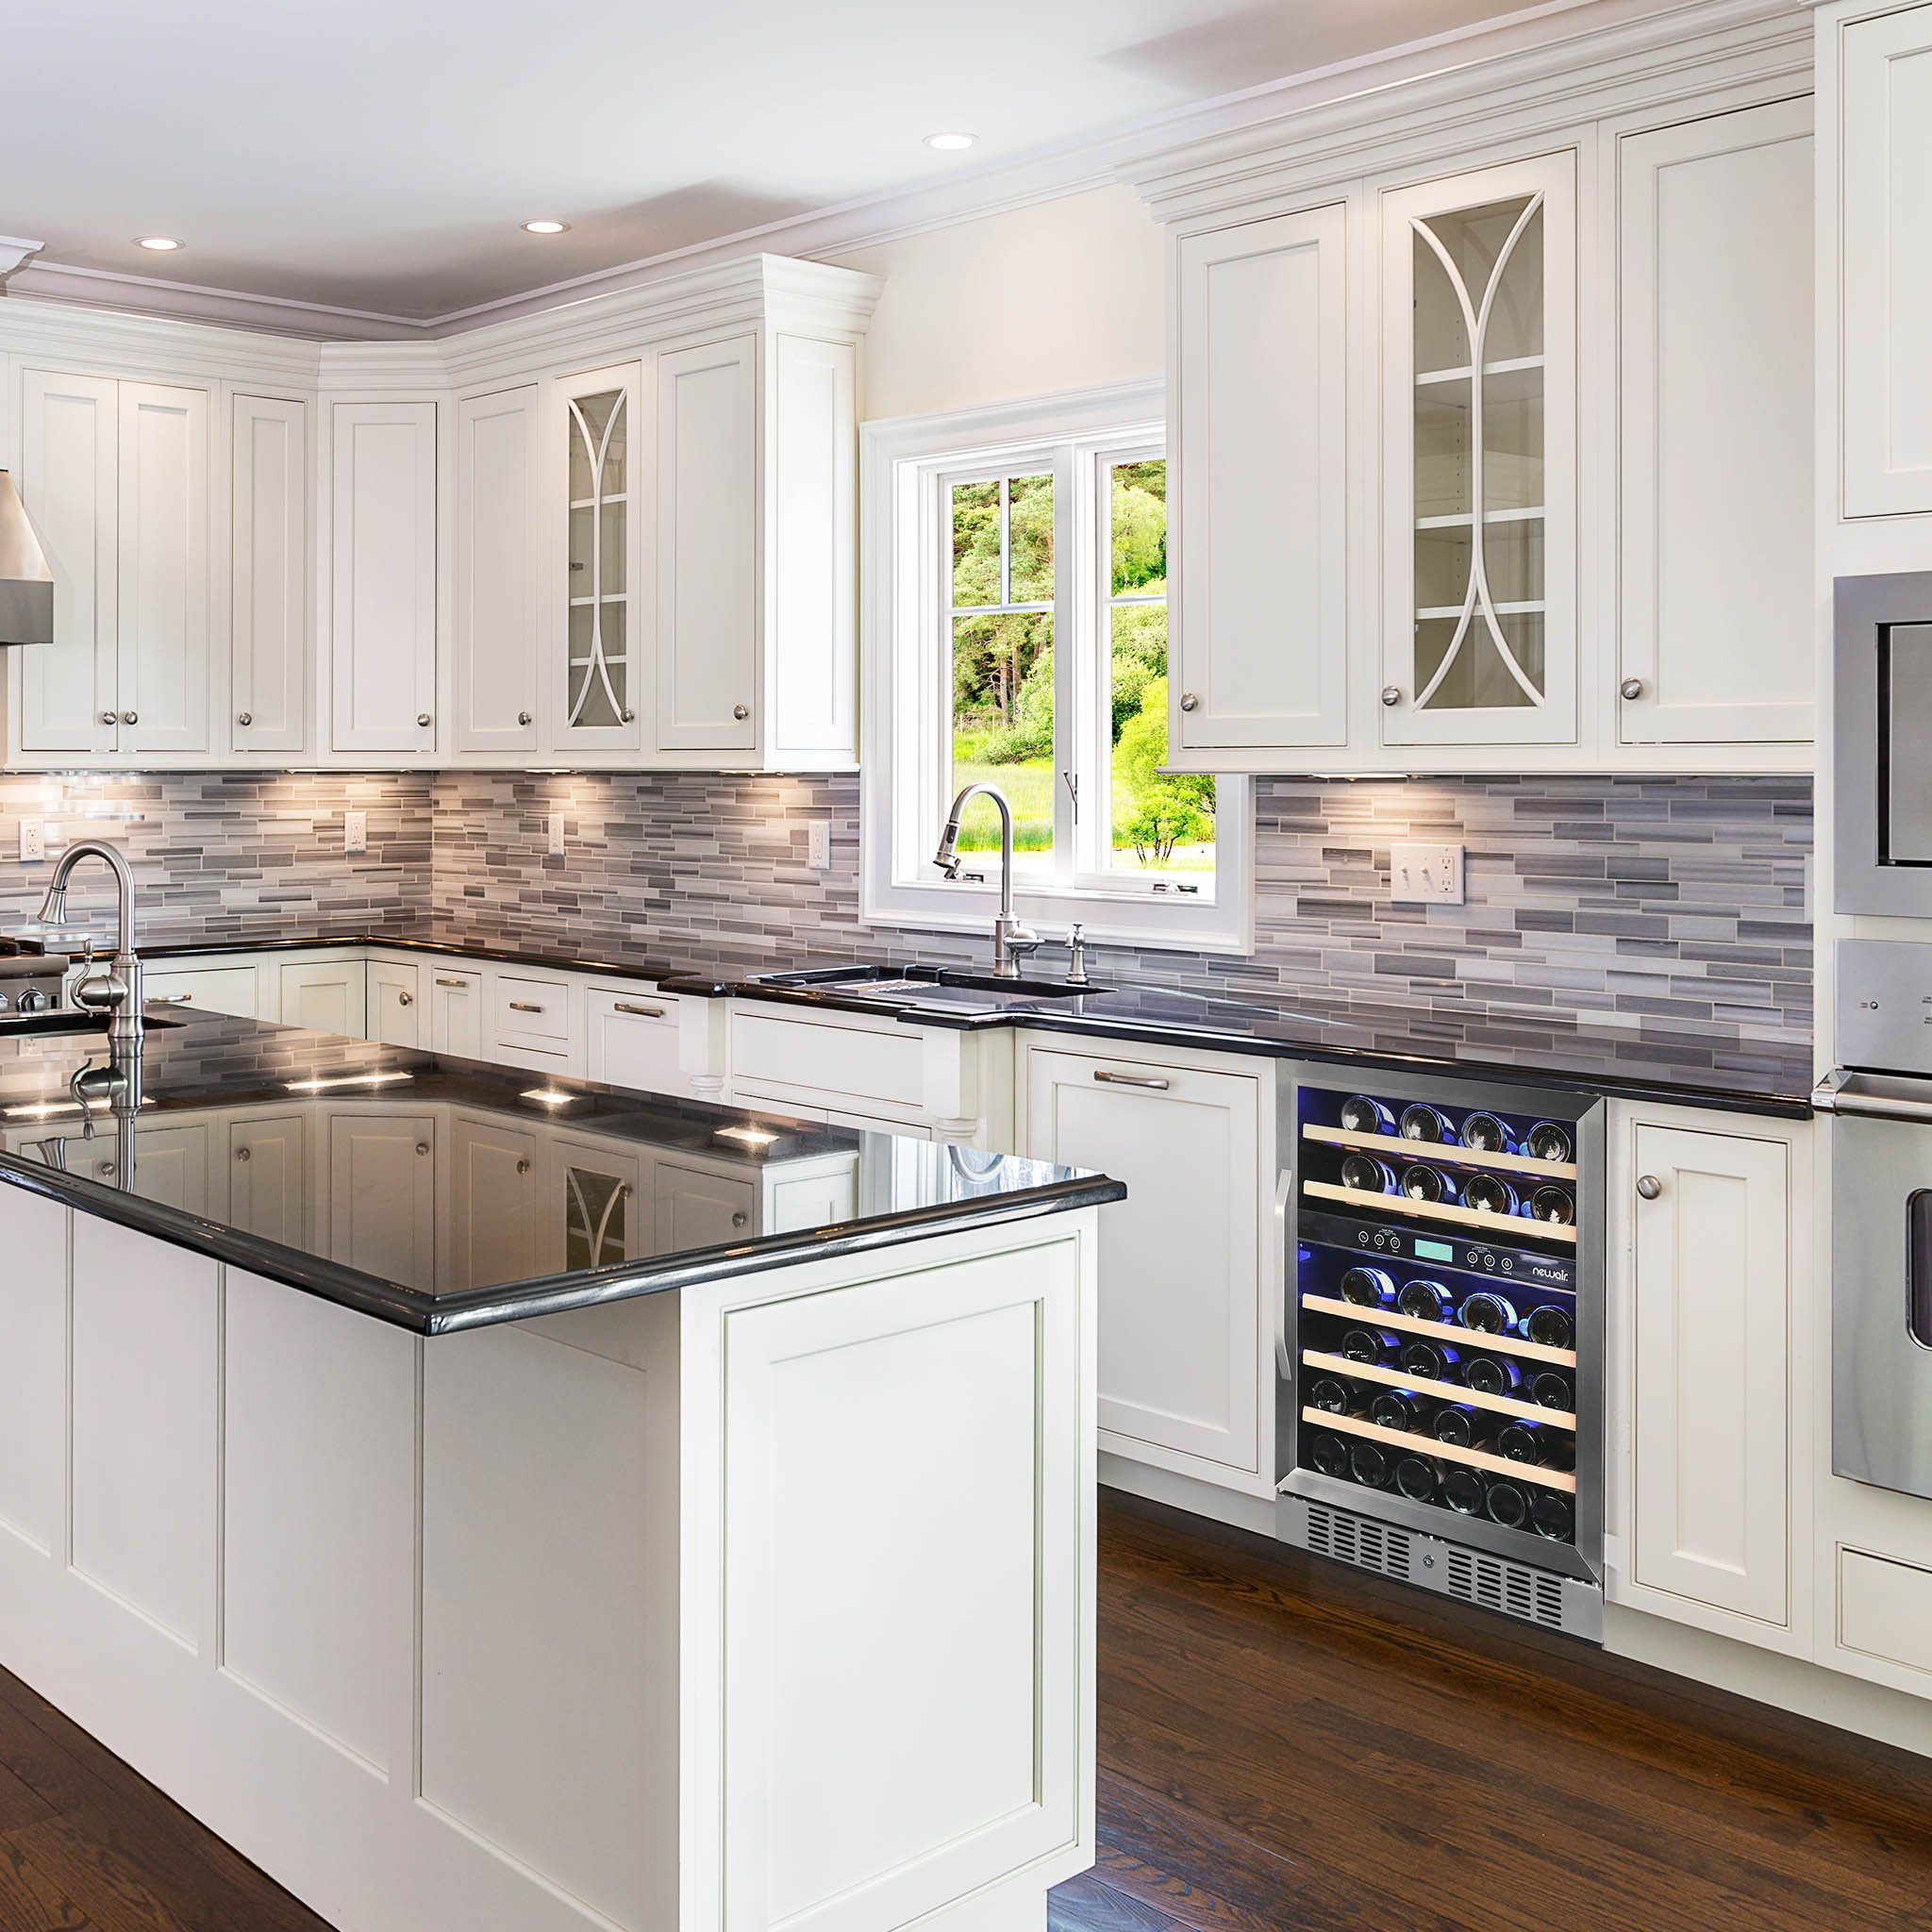 Best Kitchen Remodeling Ideas To Renovate Your Kitchen - Foyr